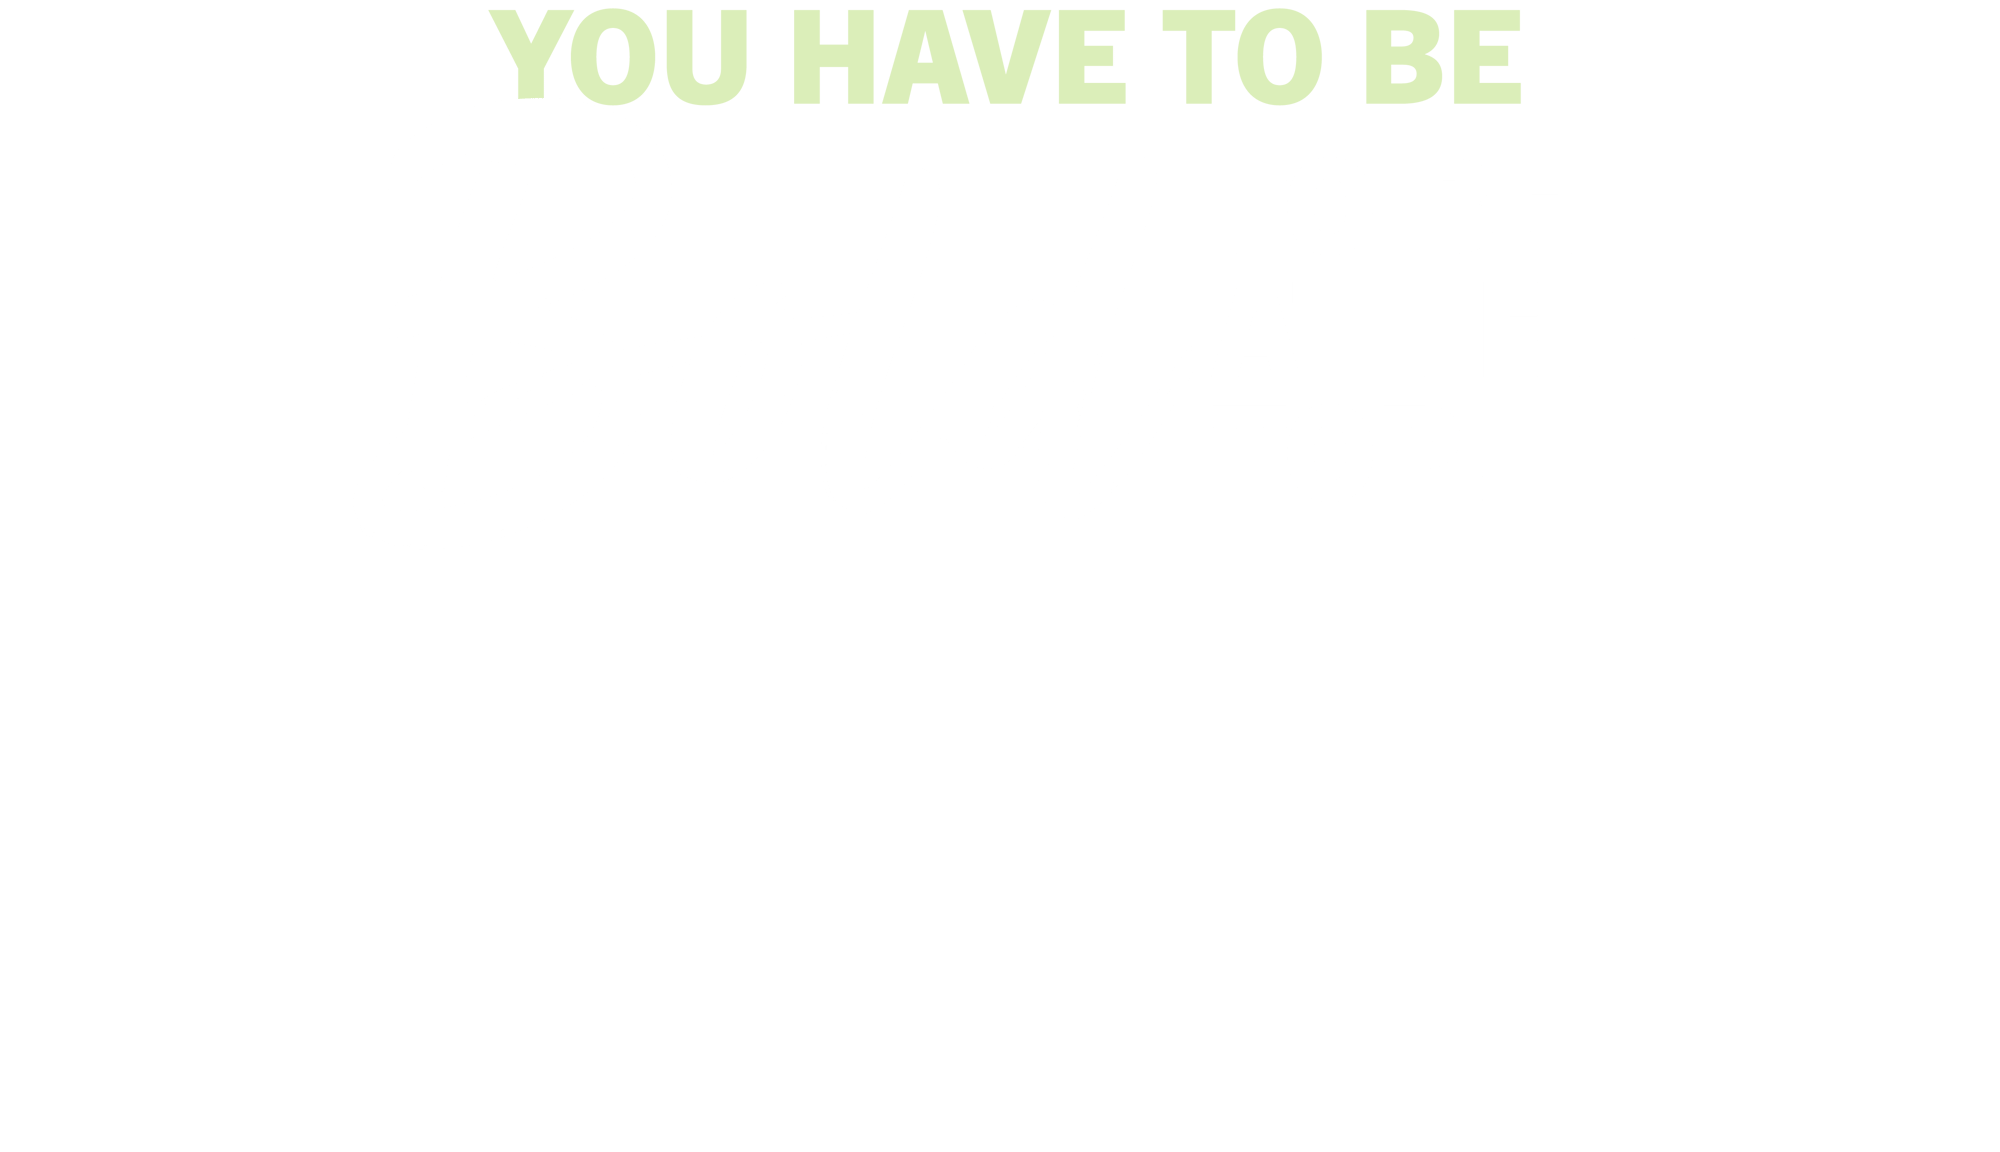 You have to be bold to be at the top